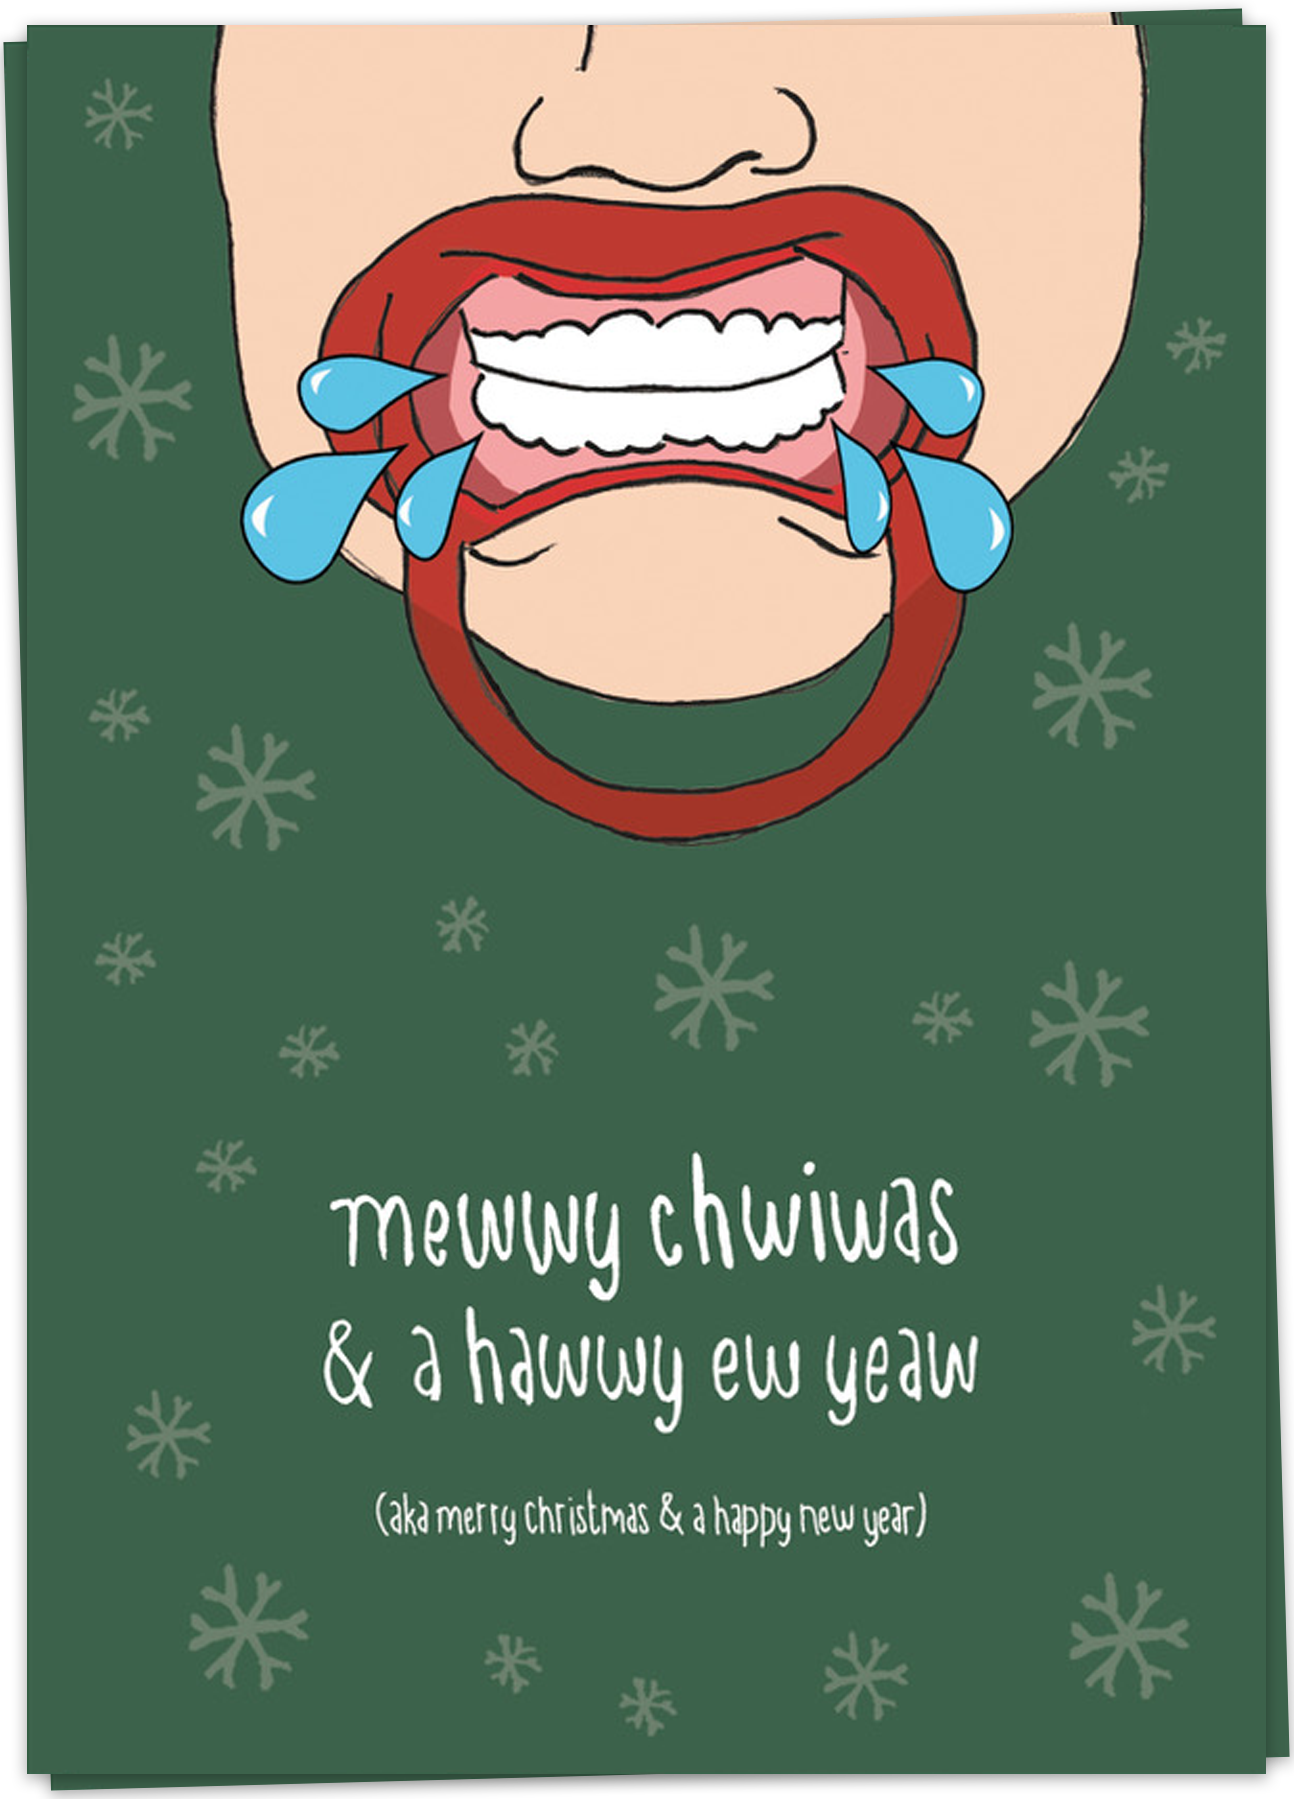 Xmas – Mouth wishes